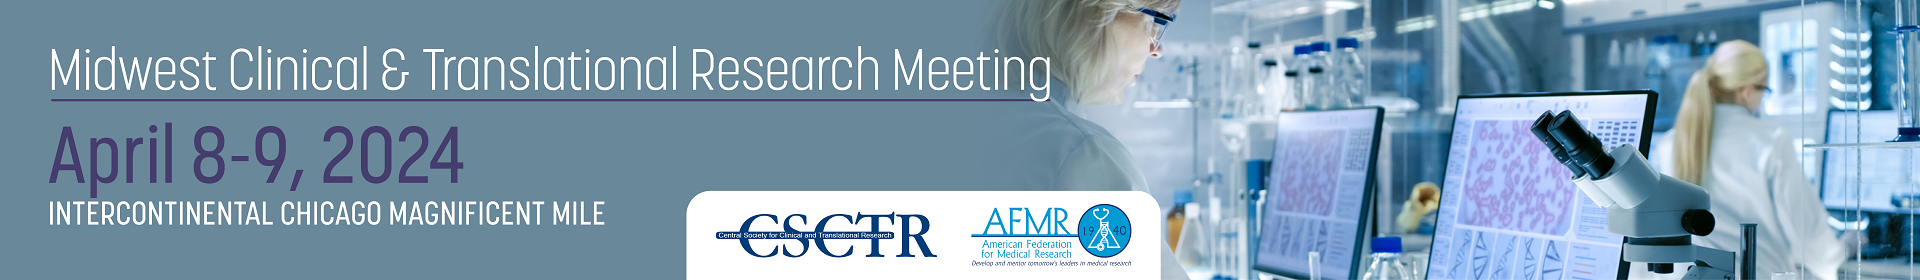 2024 Midwest Clinical and Translational Research Meeting  Event Banner